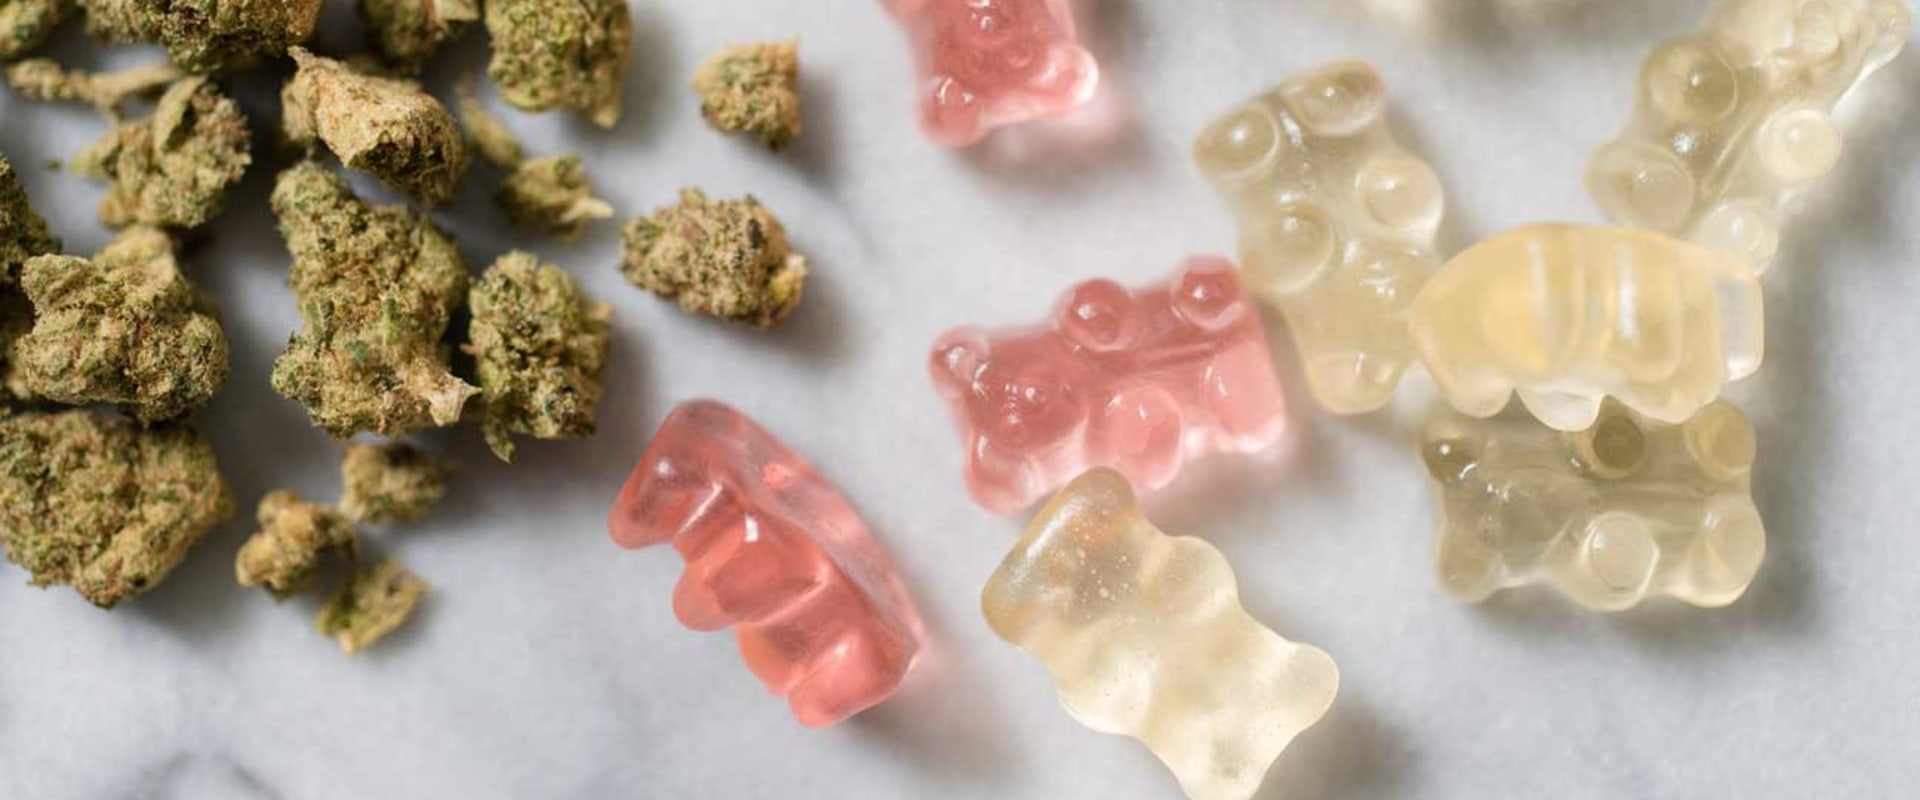 What are the Benefits of Hemp Gummies?